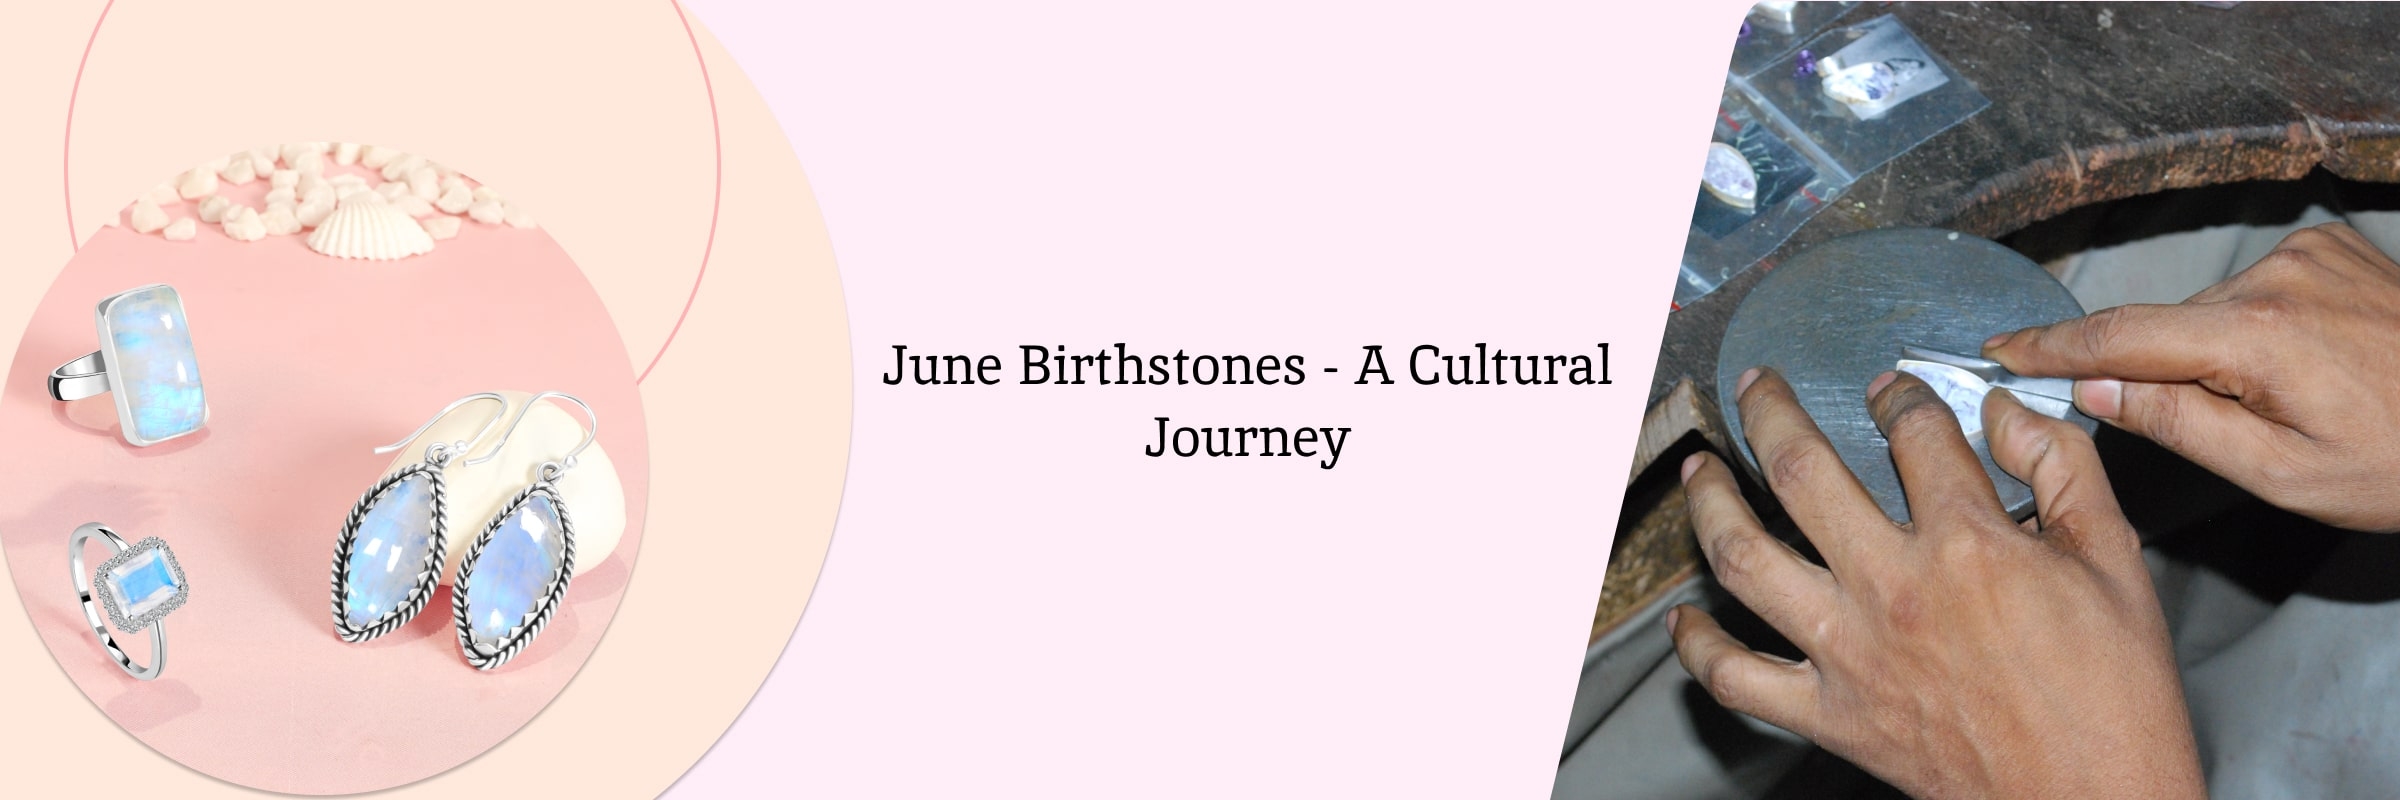 Cultural & Historical Importance of June Birthstones